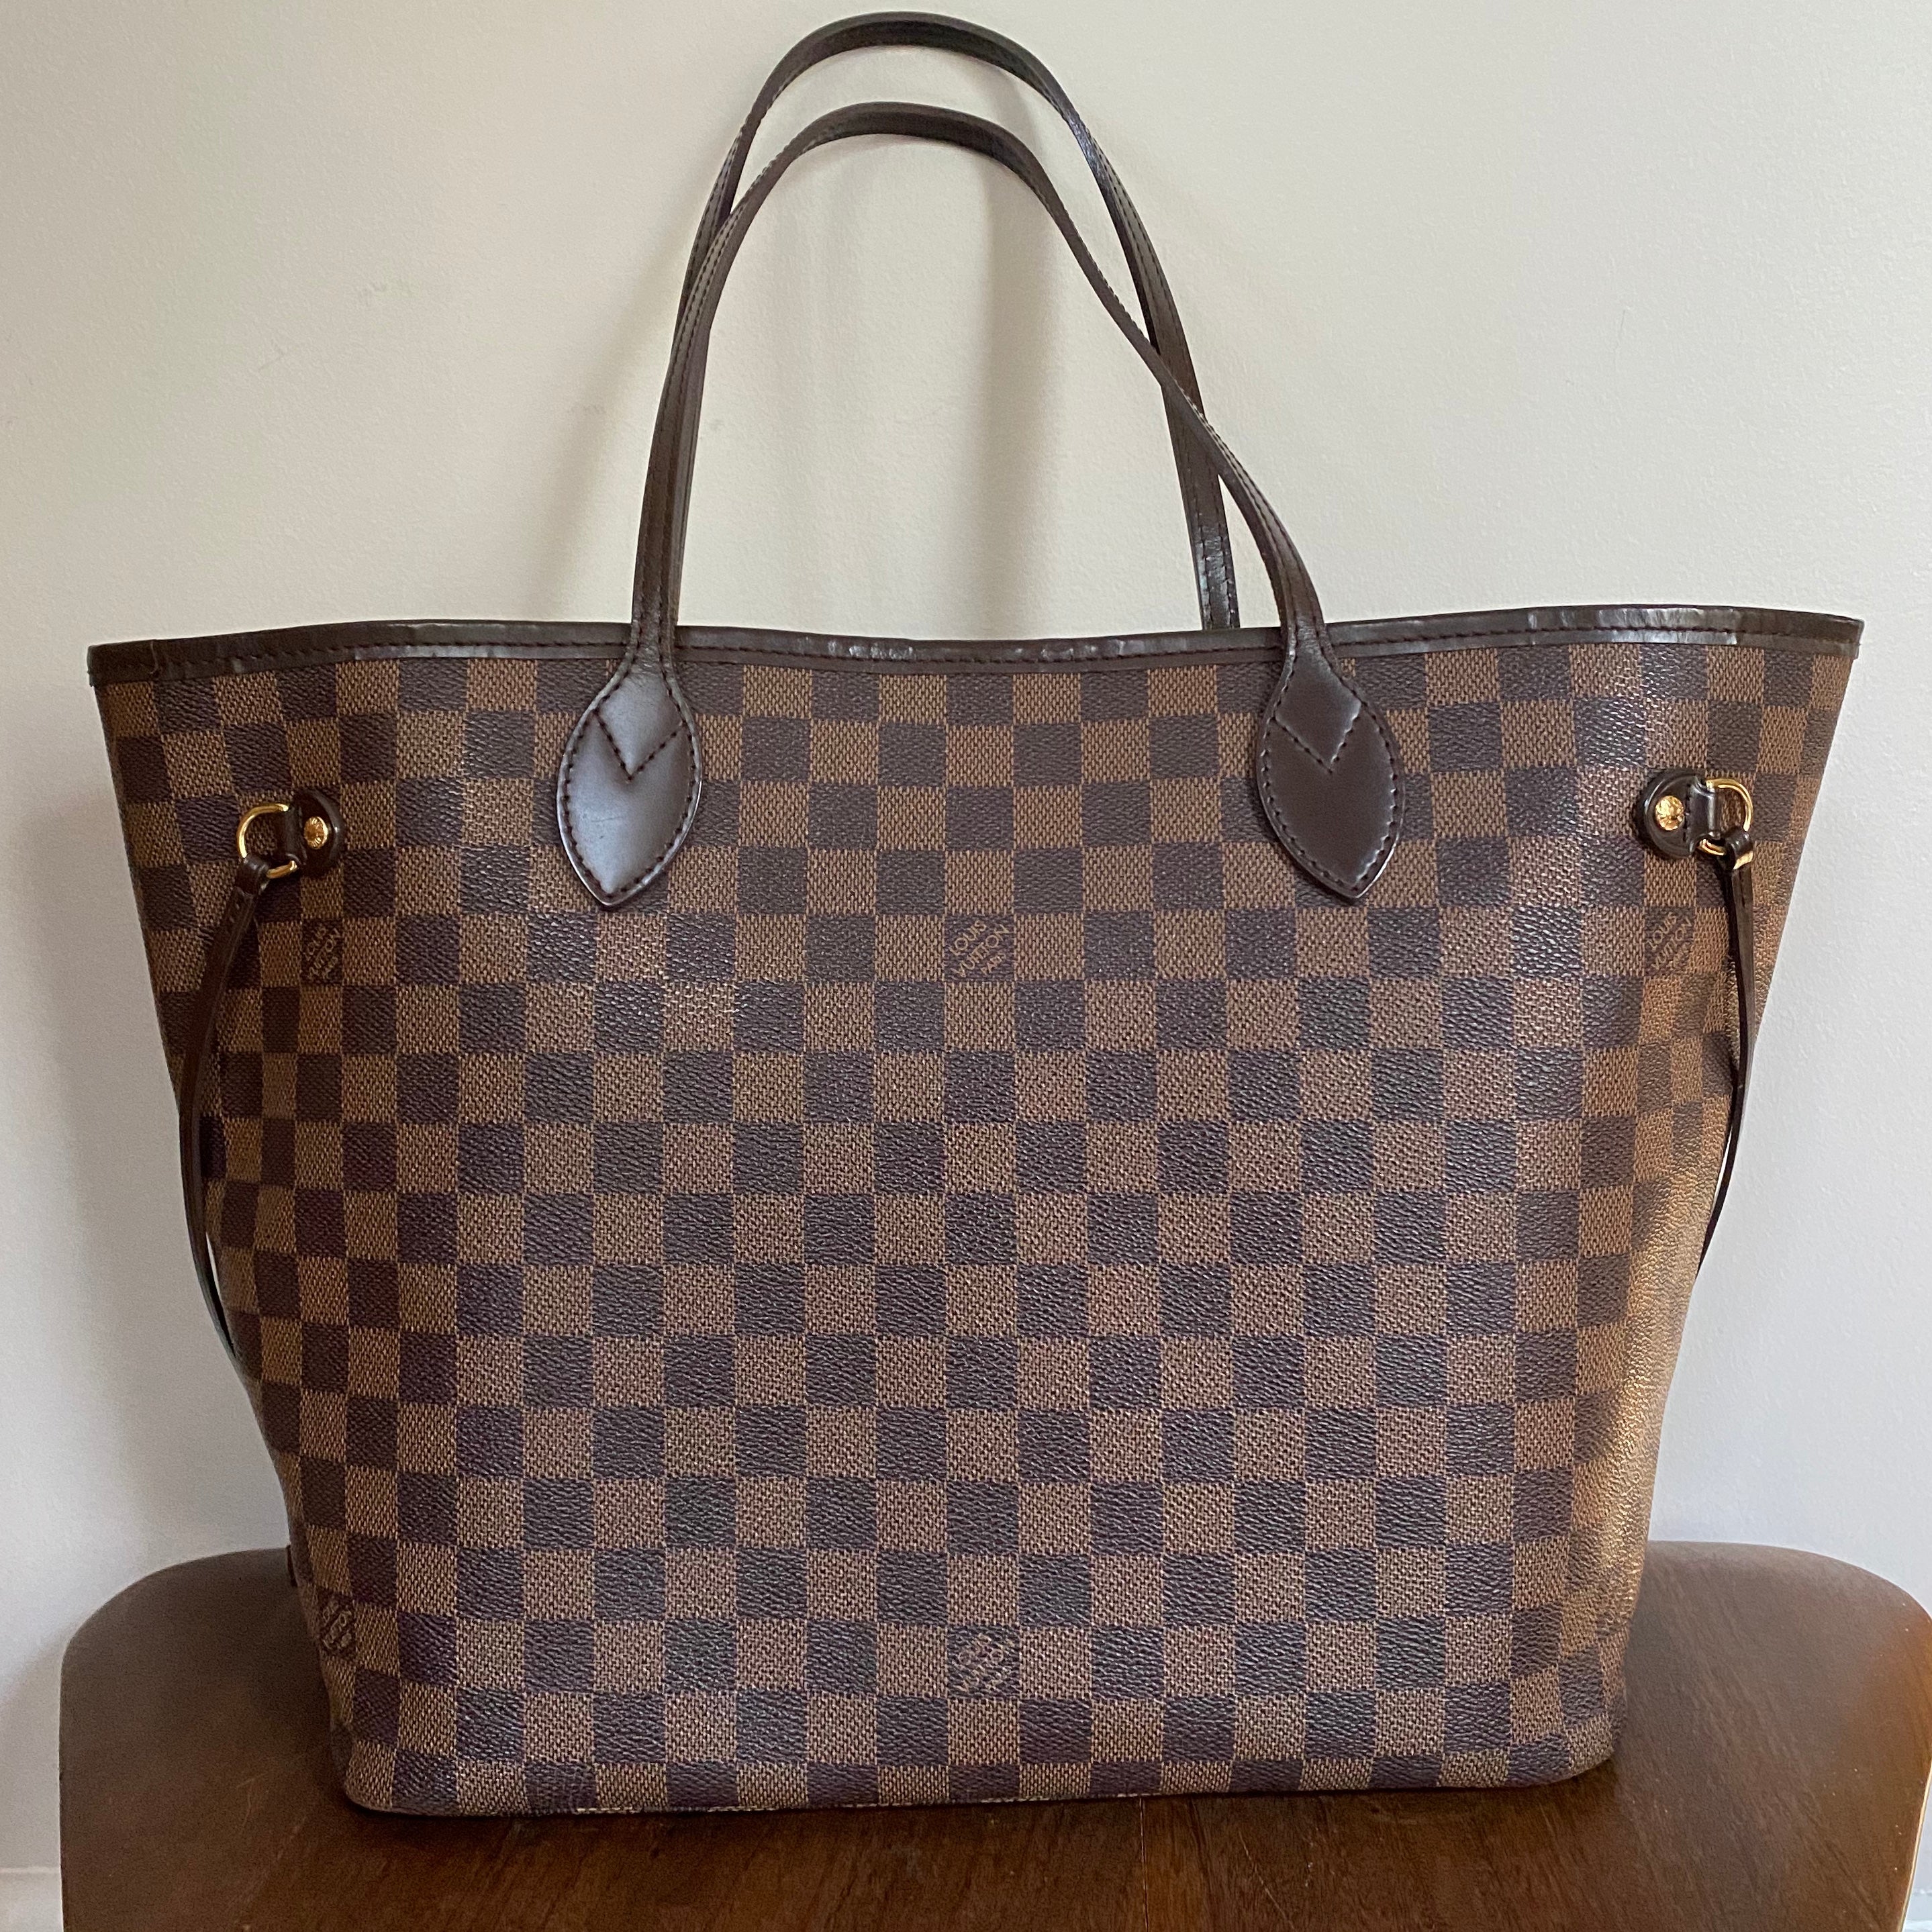 Louis Vuitton Neverfull Bags for sale in St Louis  Facebook Marketplace   Facebook